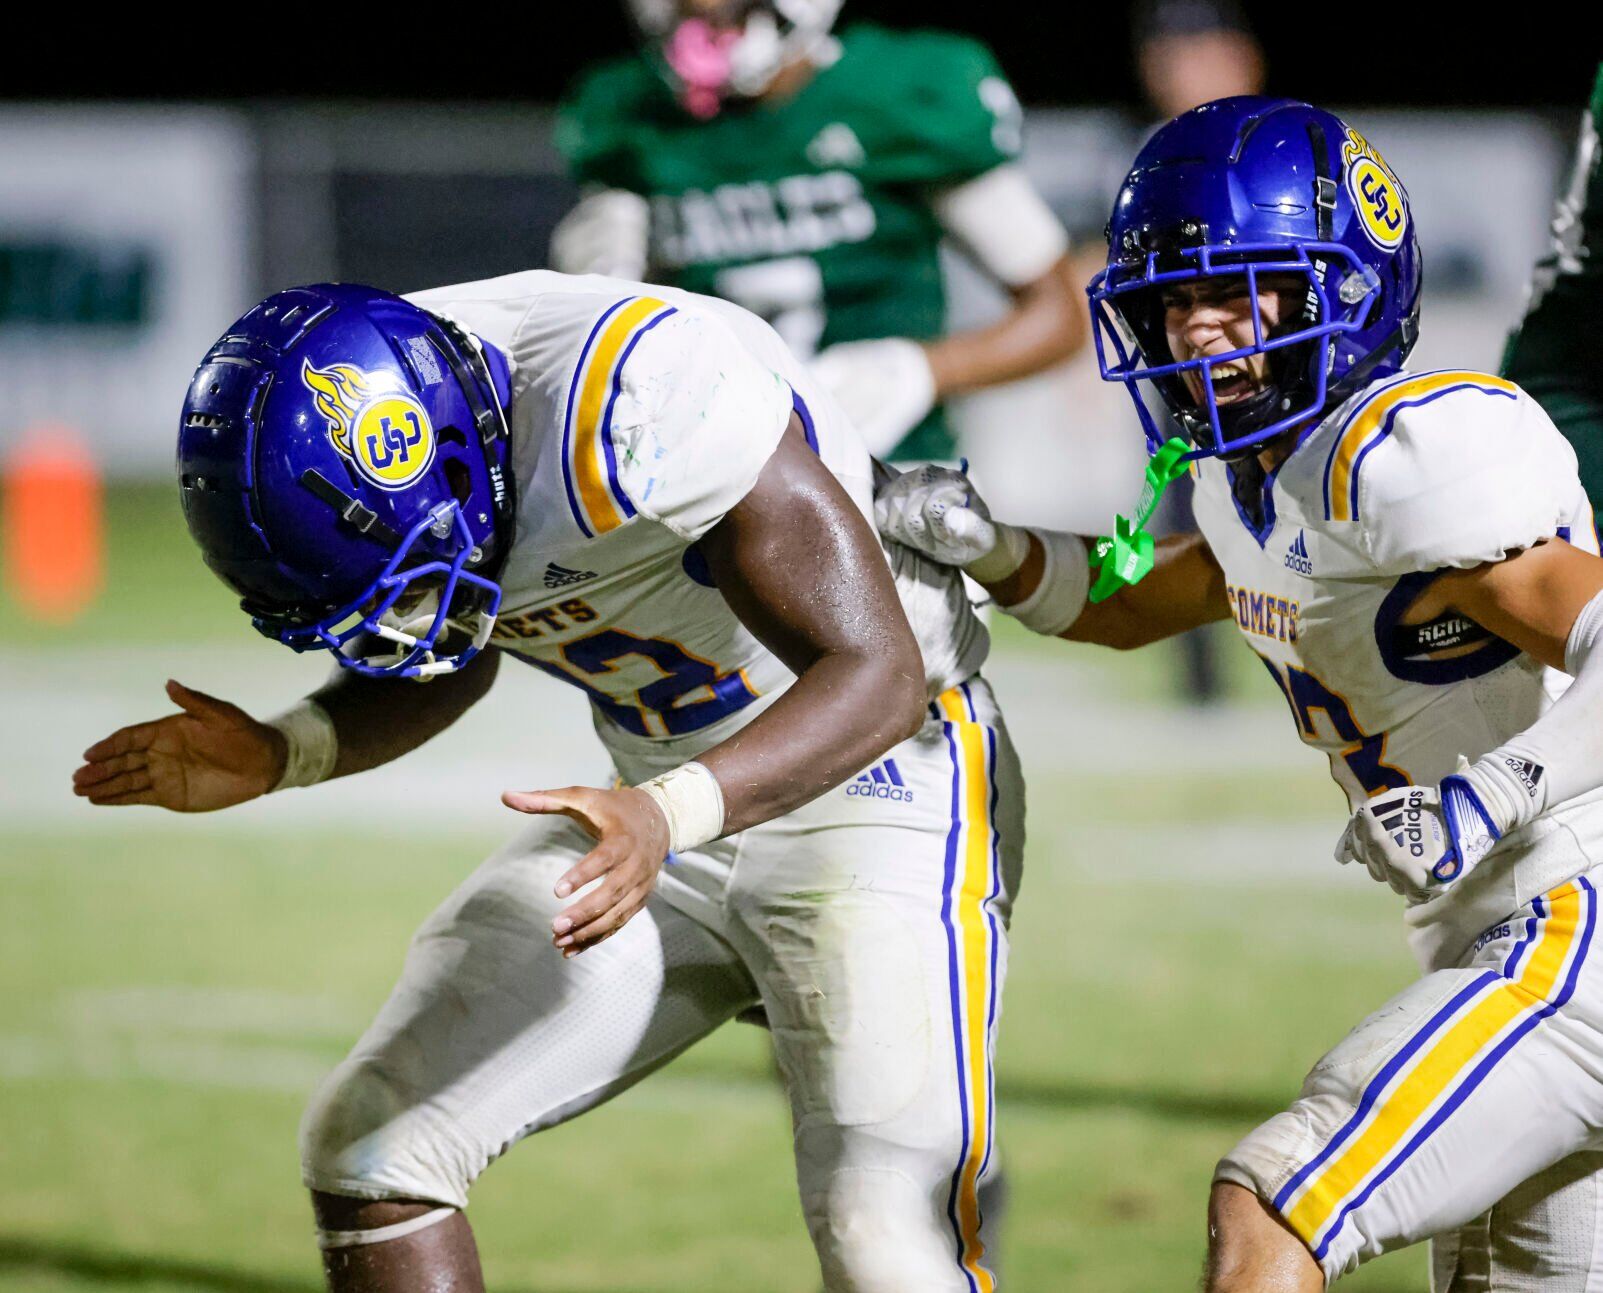 Calvary’s Abram Wardell and St. Charles’ Kyle Cannon Shine in LSWA’s 2A All-State Football Team